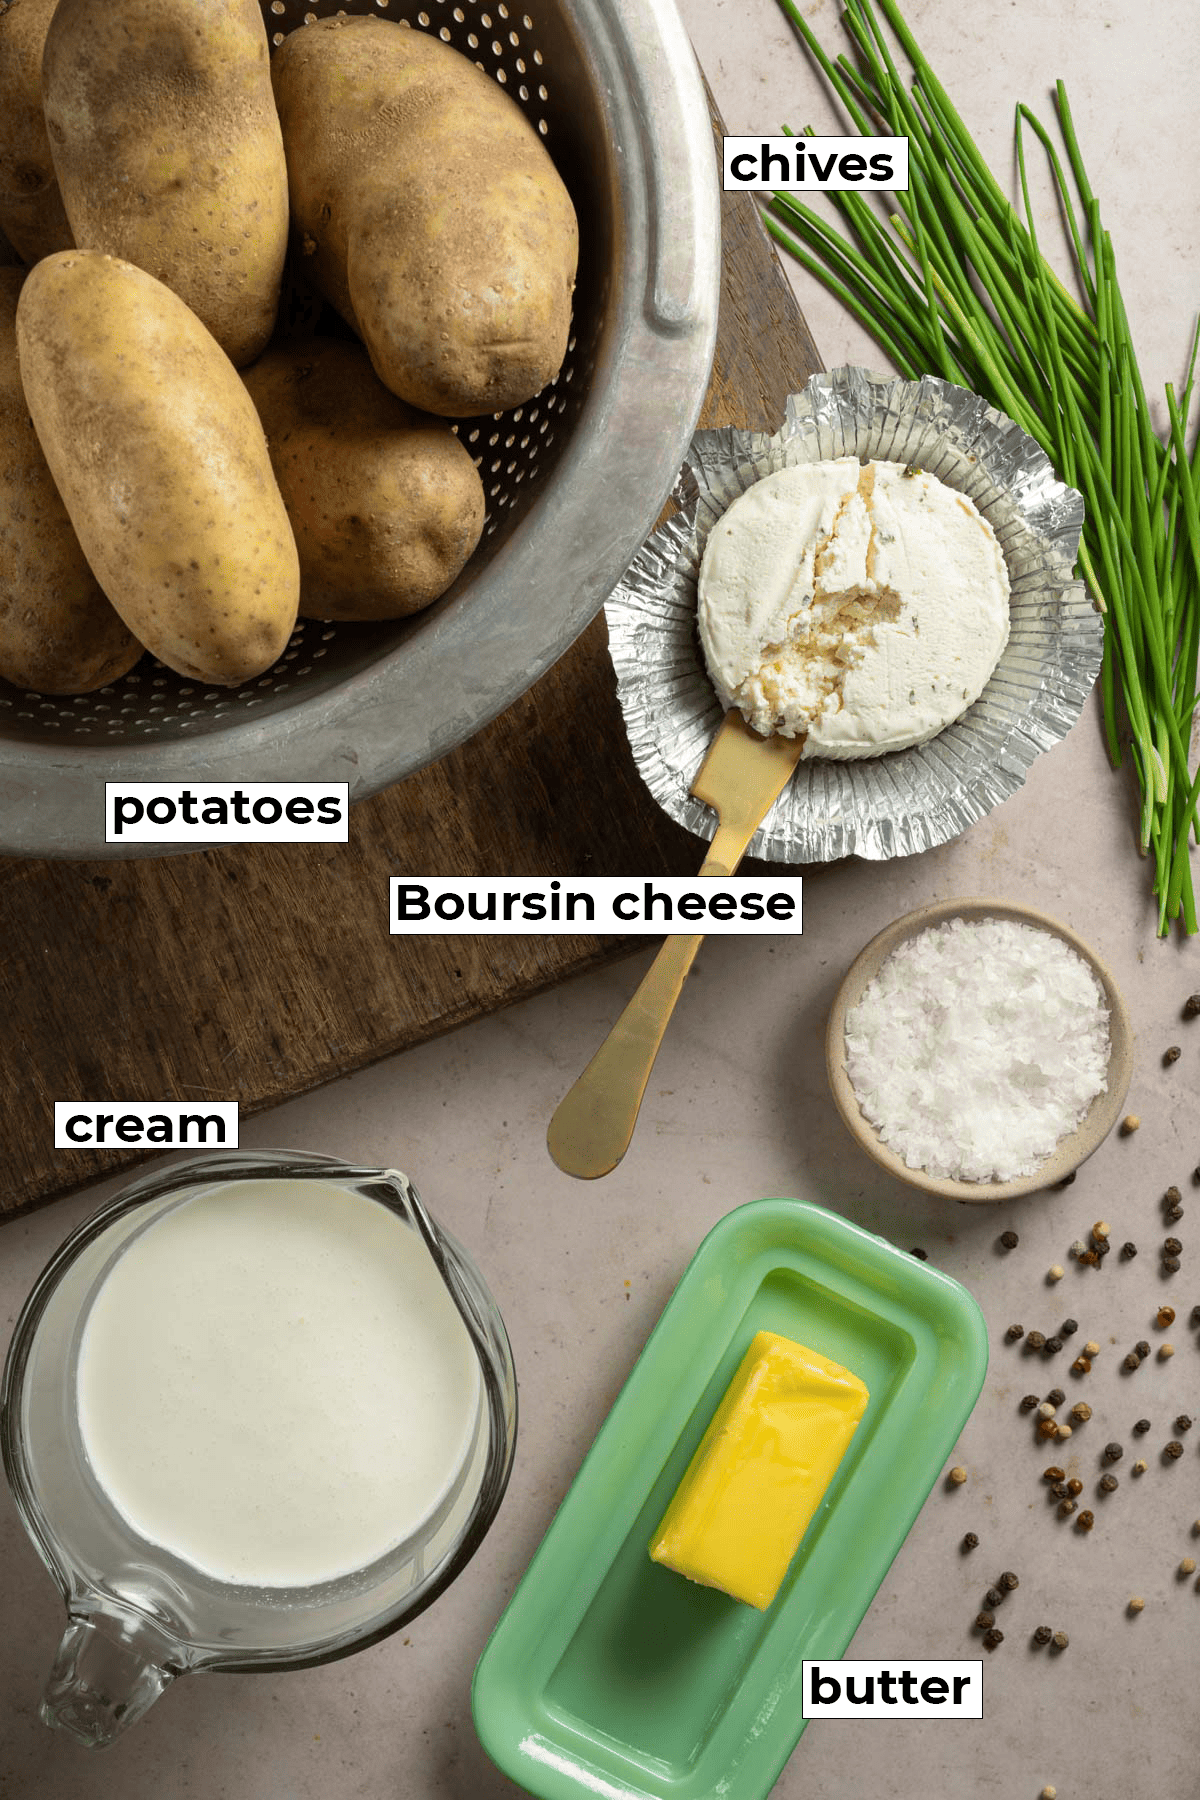 Labeled ingredients for boursin mashed potatoes.